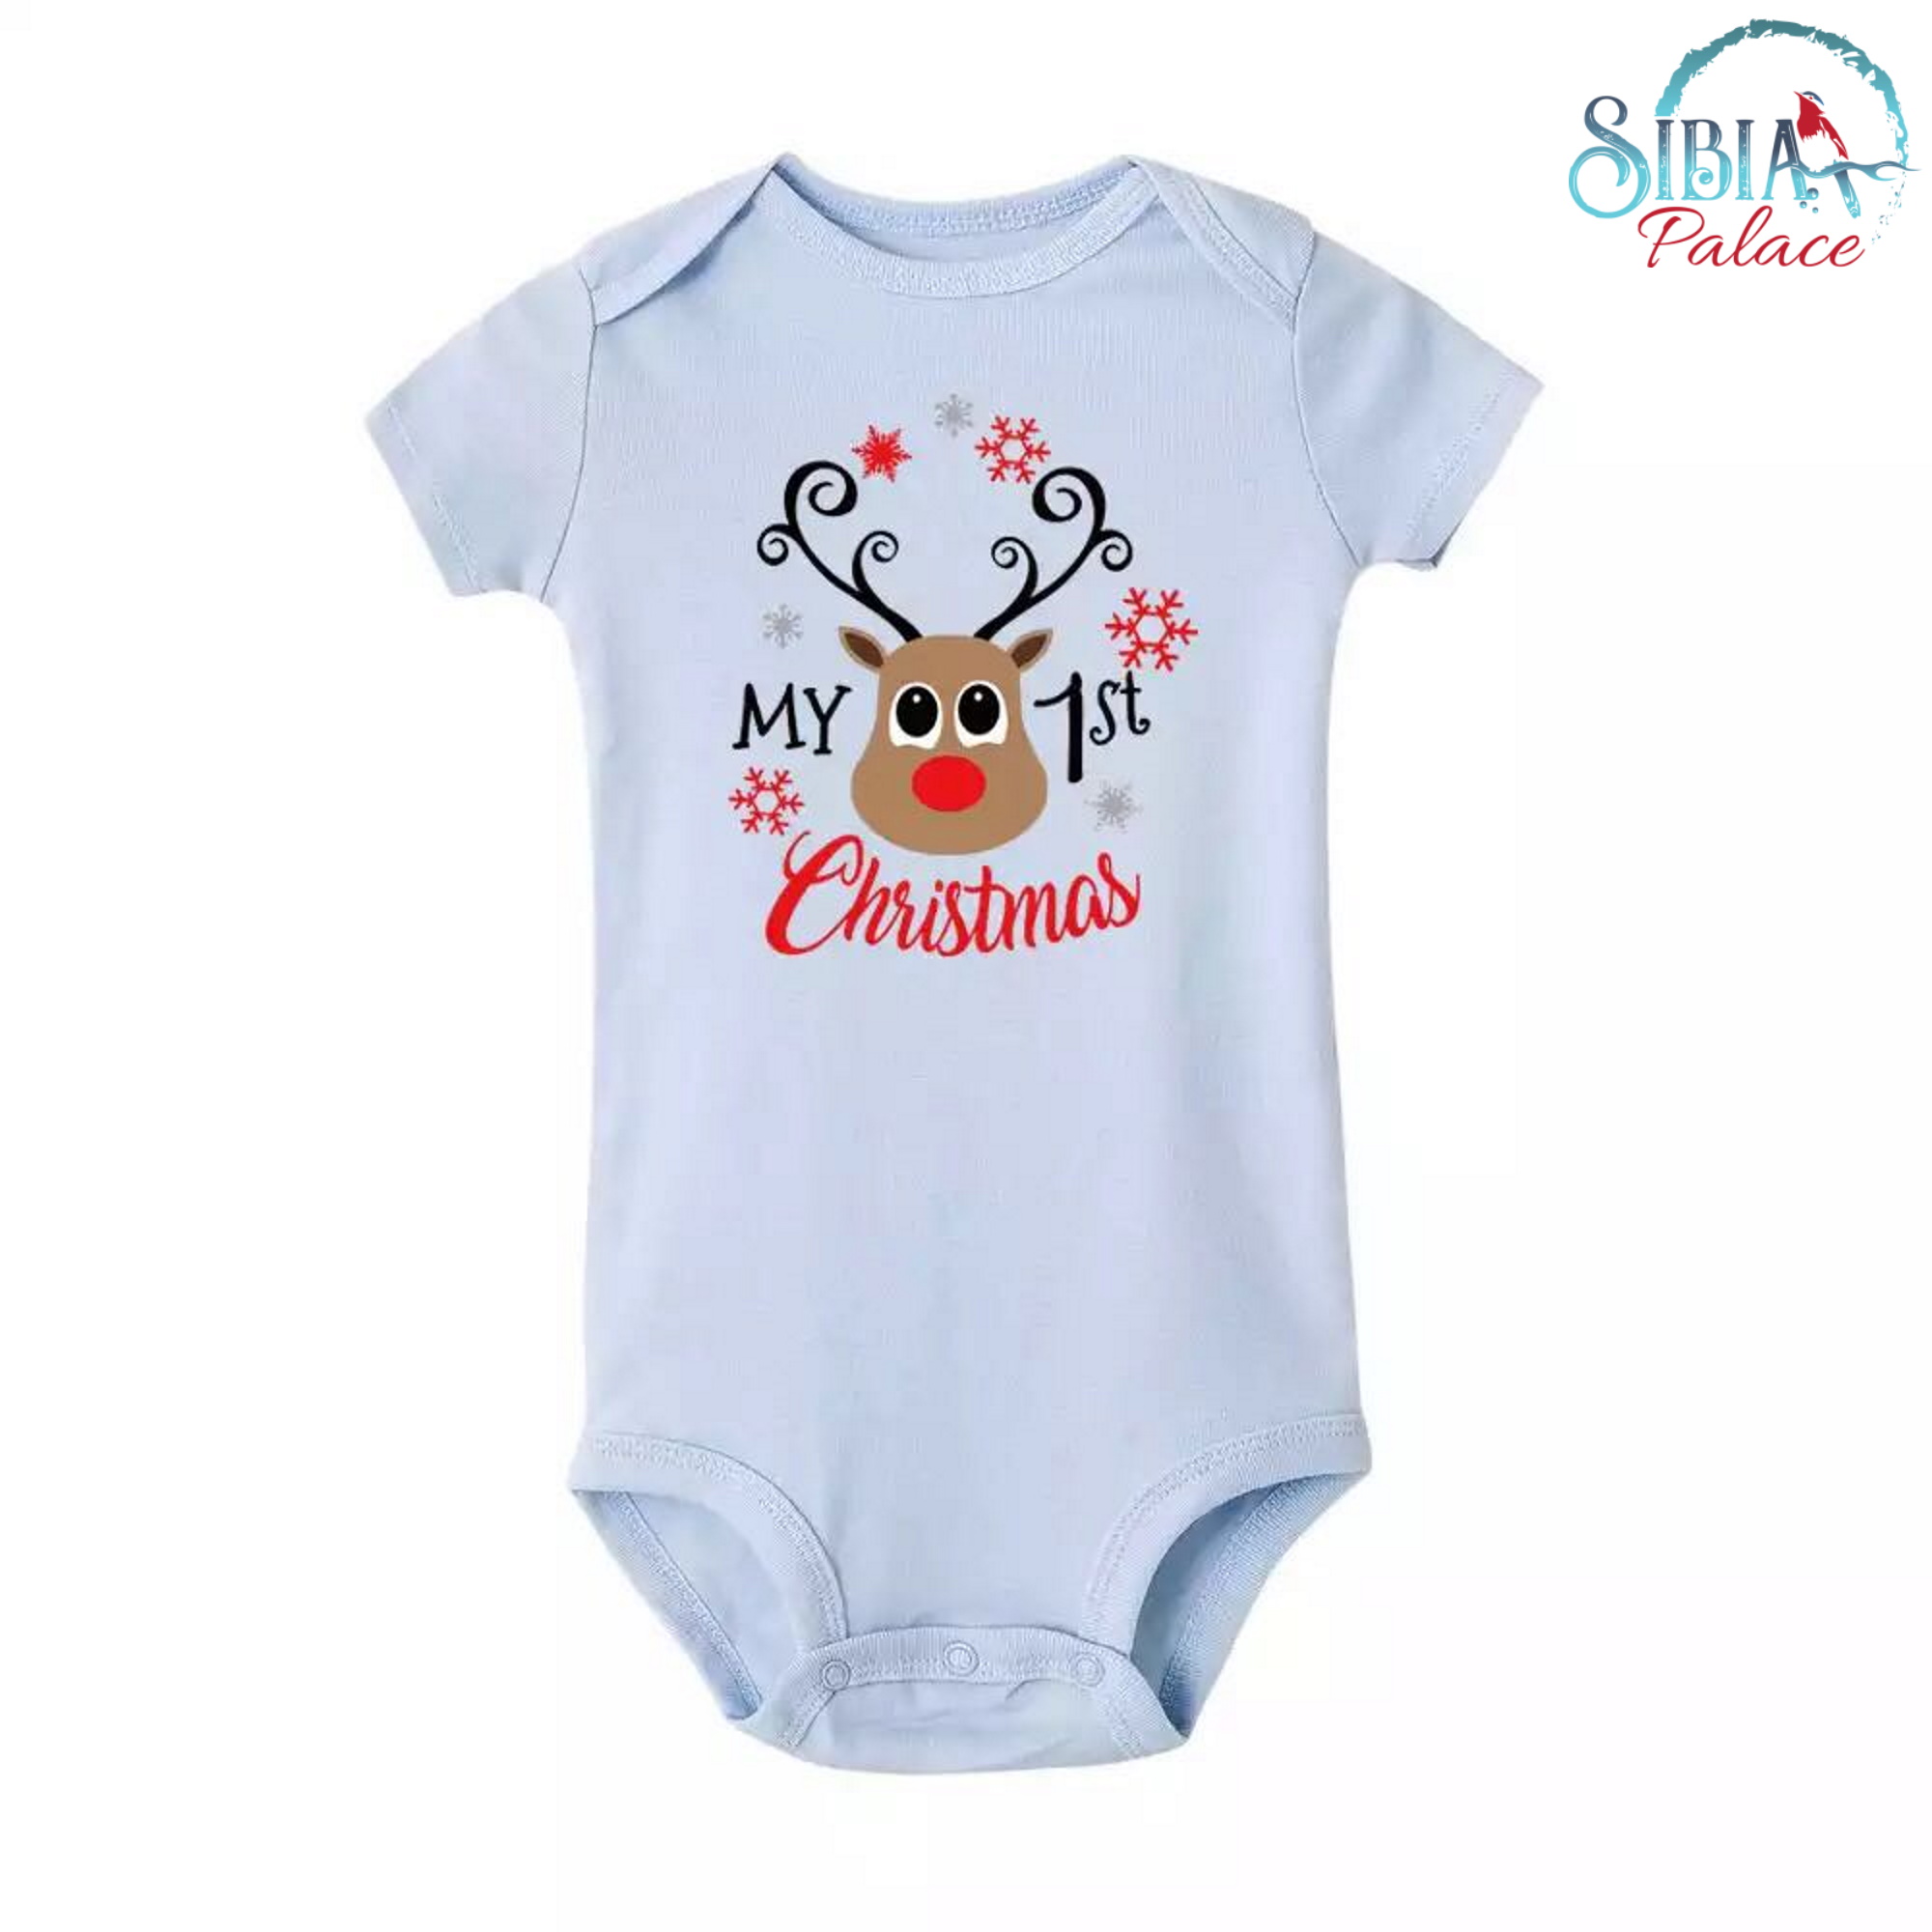 Sibia Palace Baby My 1st Christmas Blue Romper Onesie Bodysuit Outfit